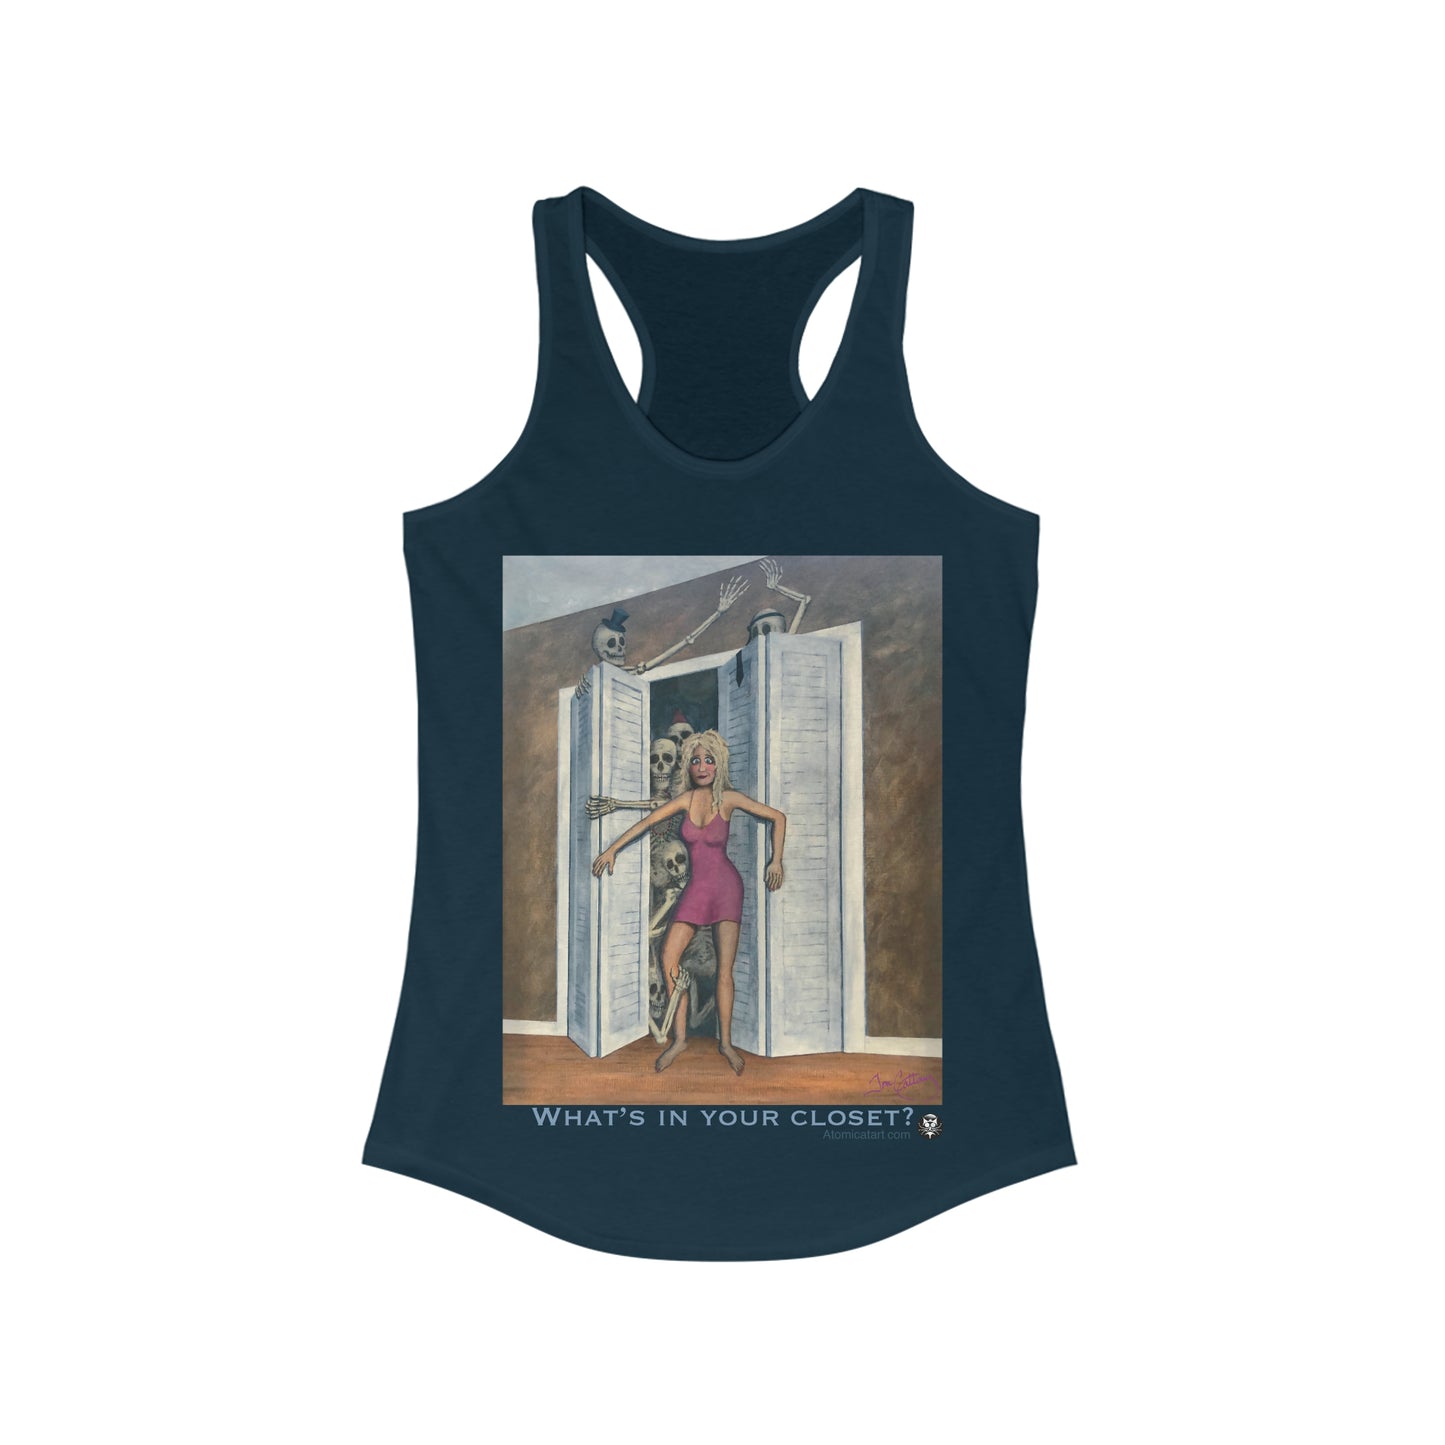 What's in your closet? - Women's Tank